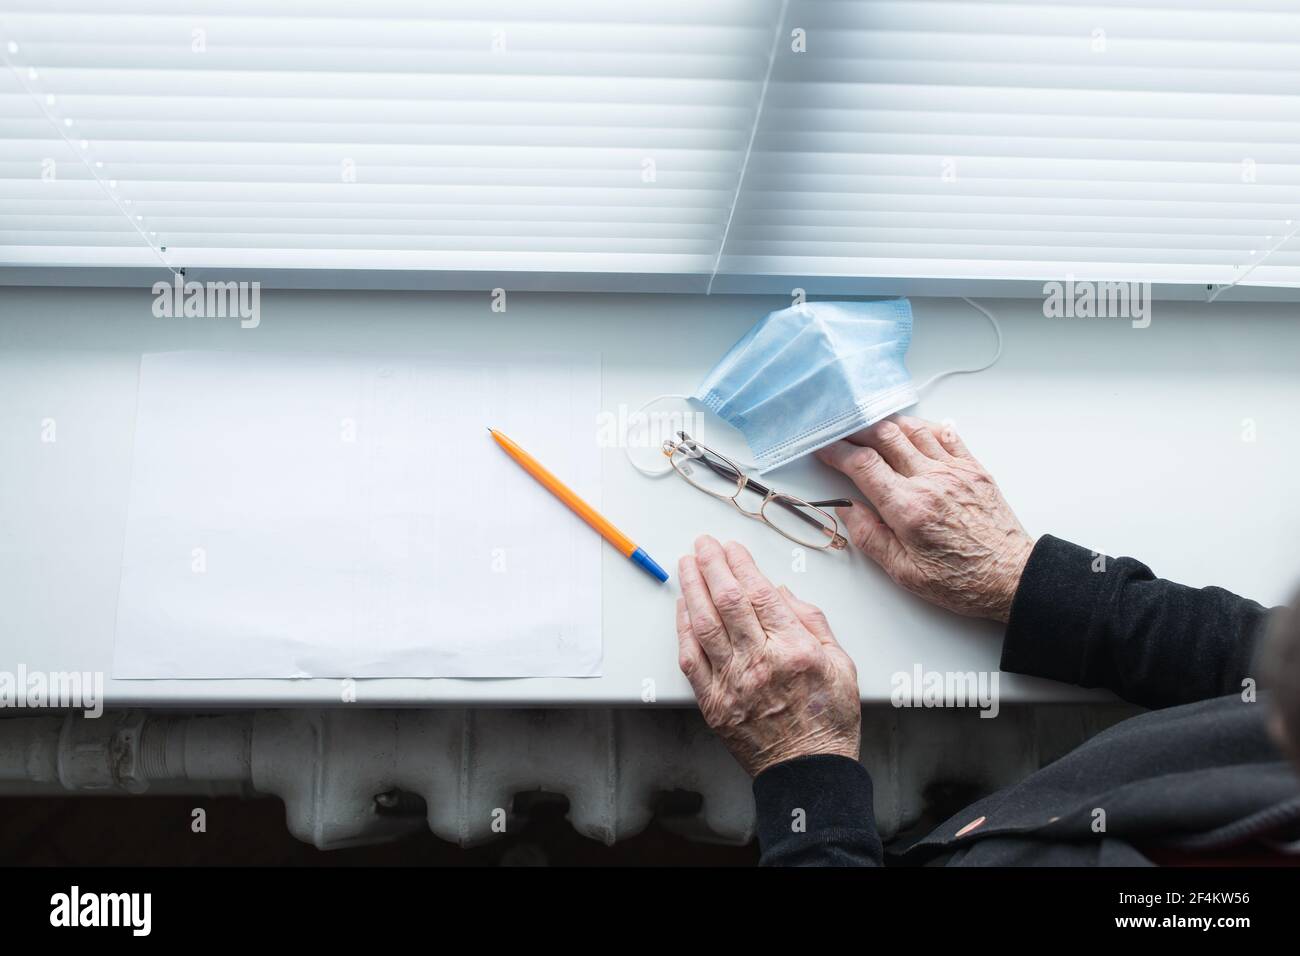 Hands of elderly woman writing a will at windowsill with medical mask and glasses. Stock Photo